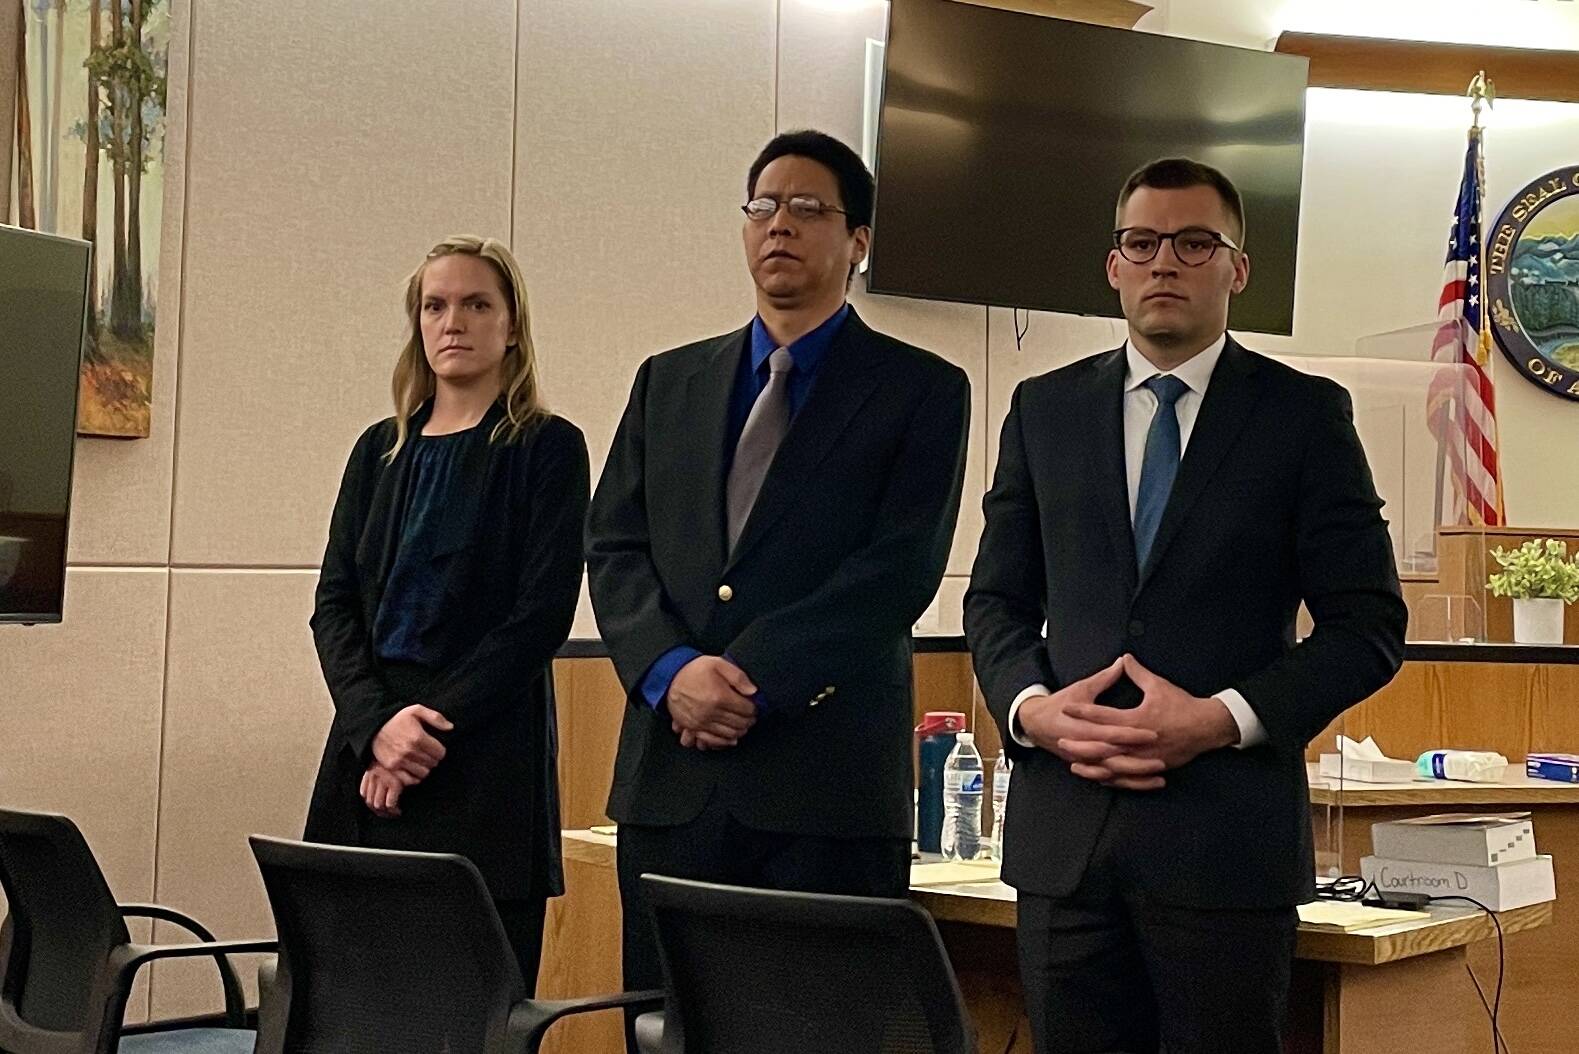 From the left, investigator Emily Chapel, defendant Fenton Jacobs and defense attorney Nicolas Ambrose stand as the jury in Jacobs’ trial enters the courtroom on May 18, 2022. (Michael S. Lockett / Juneau Empire)